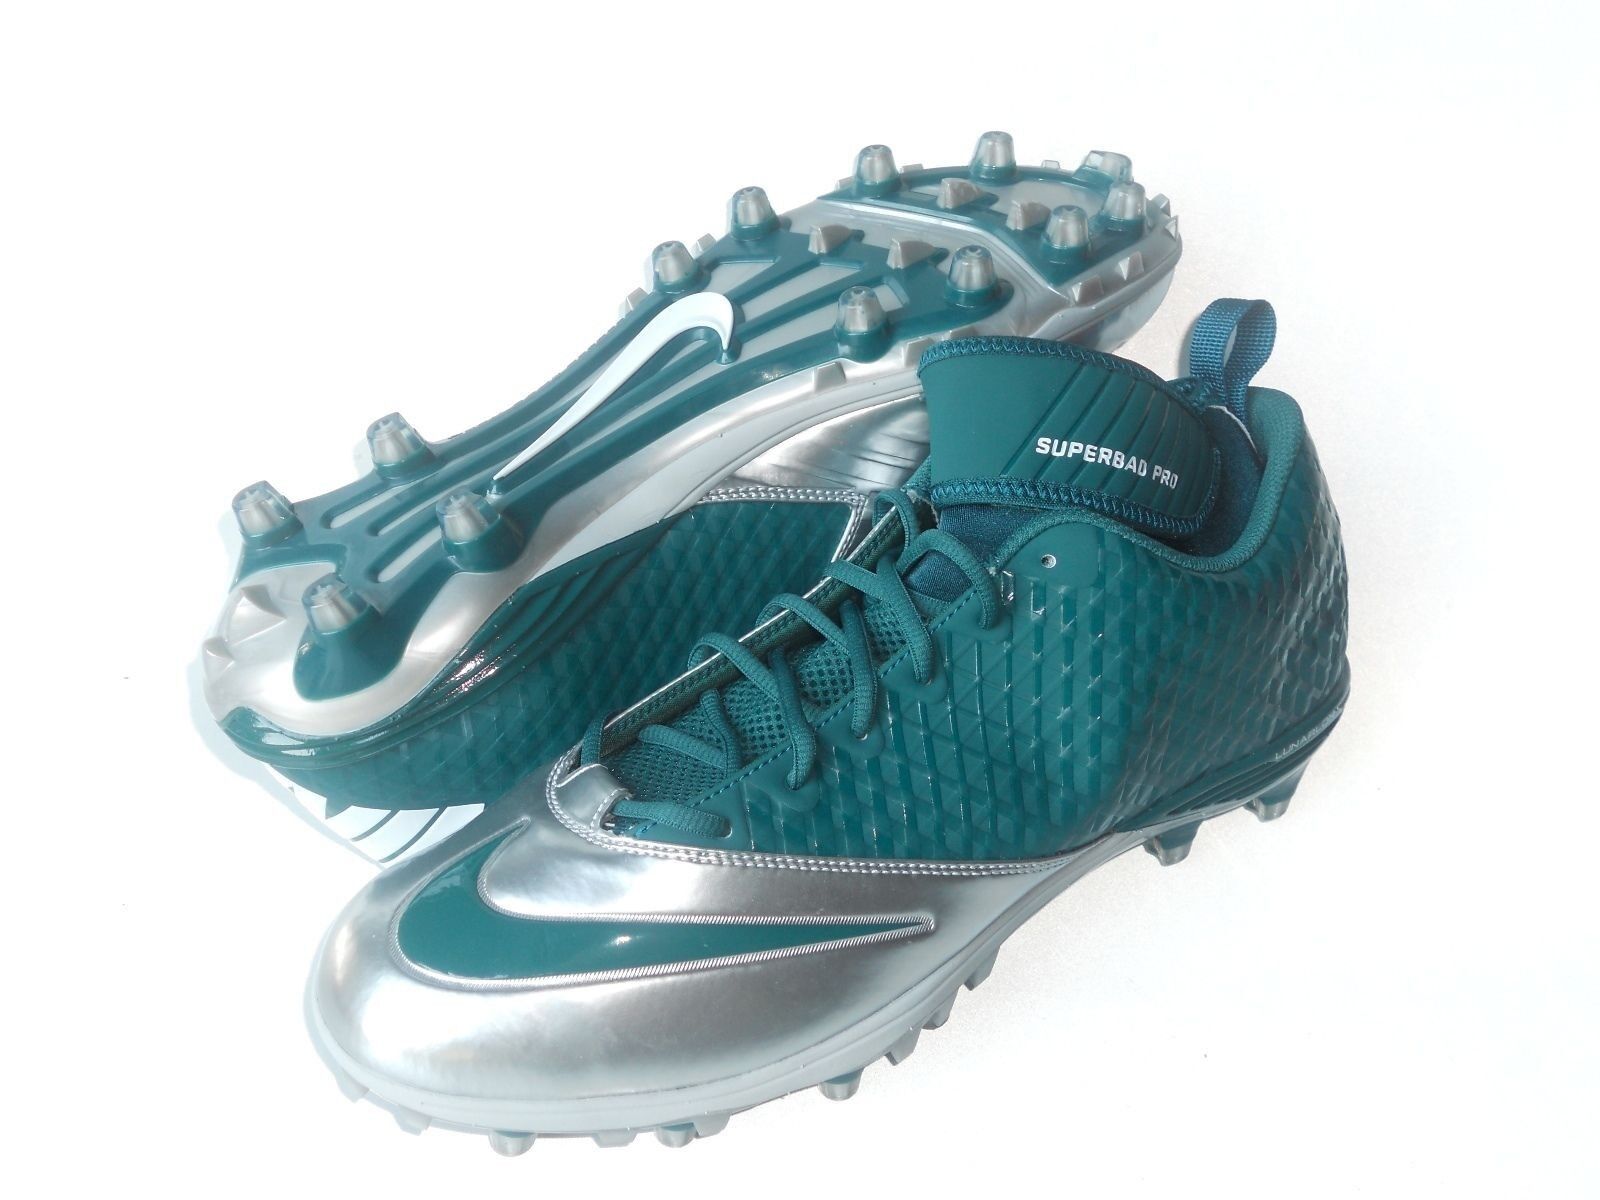 Nike Lunar SuperBad Pro TD NFL PF Football Cleats Style 534994-324 Eagles